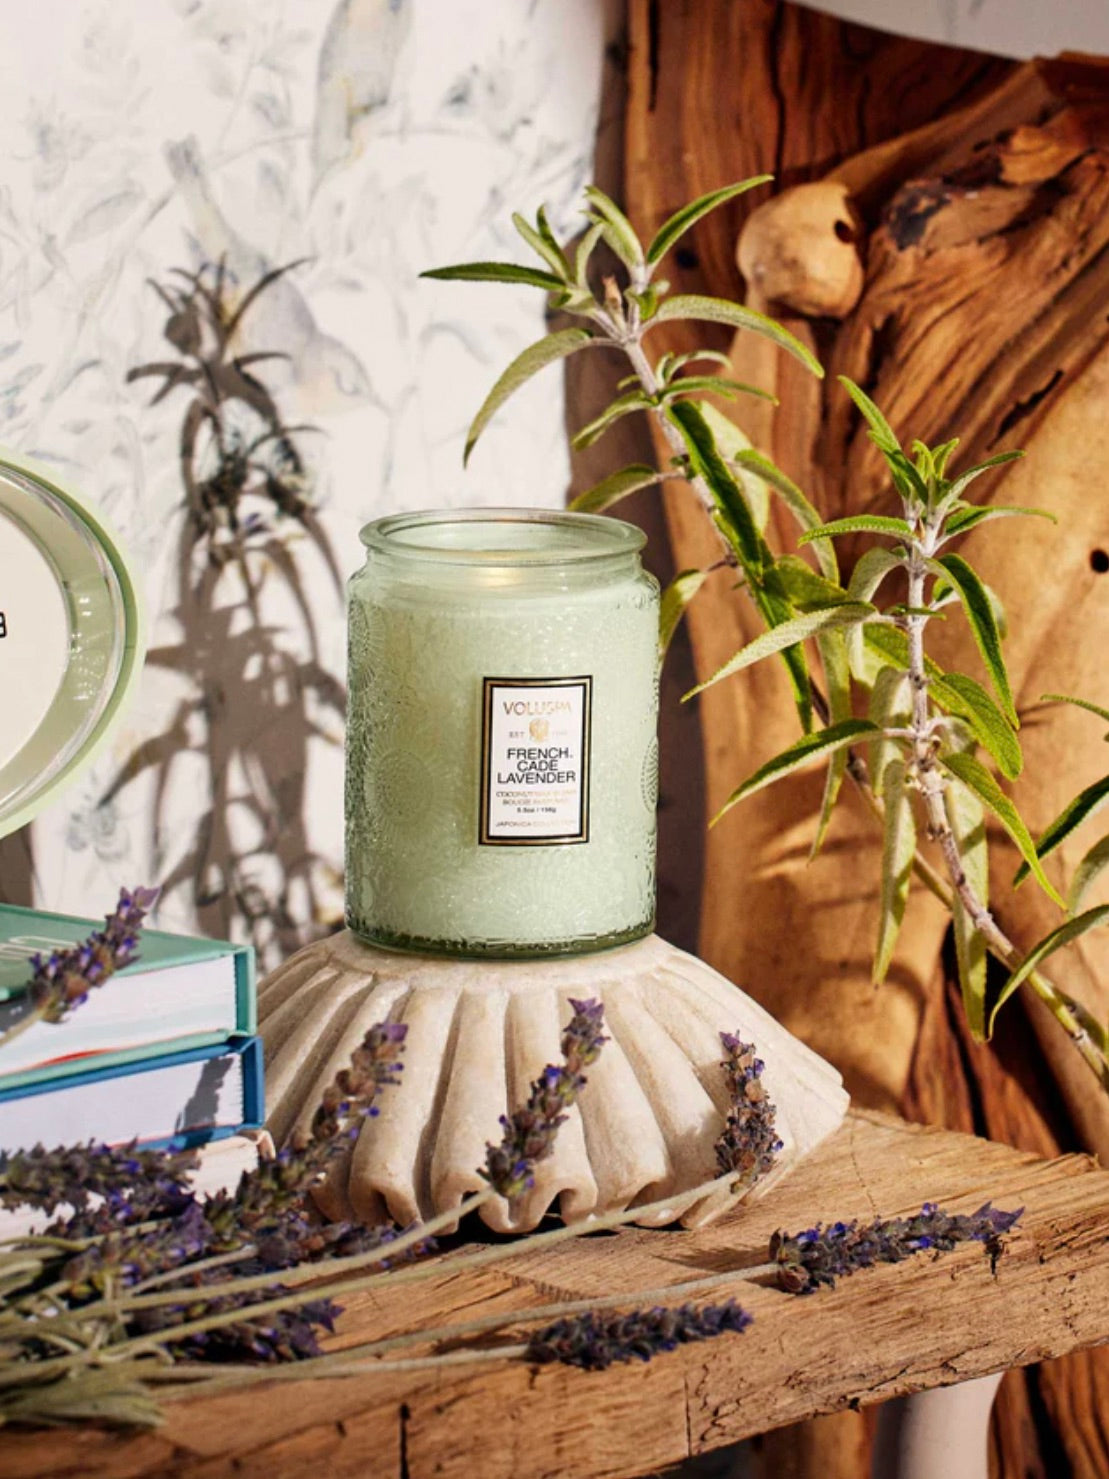 French Cade Lavender Mini Candle